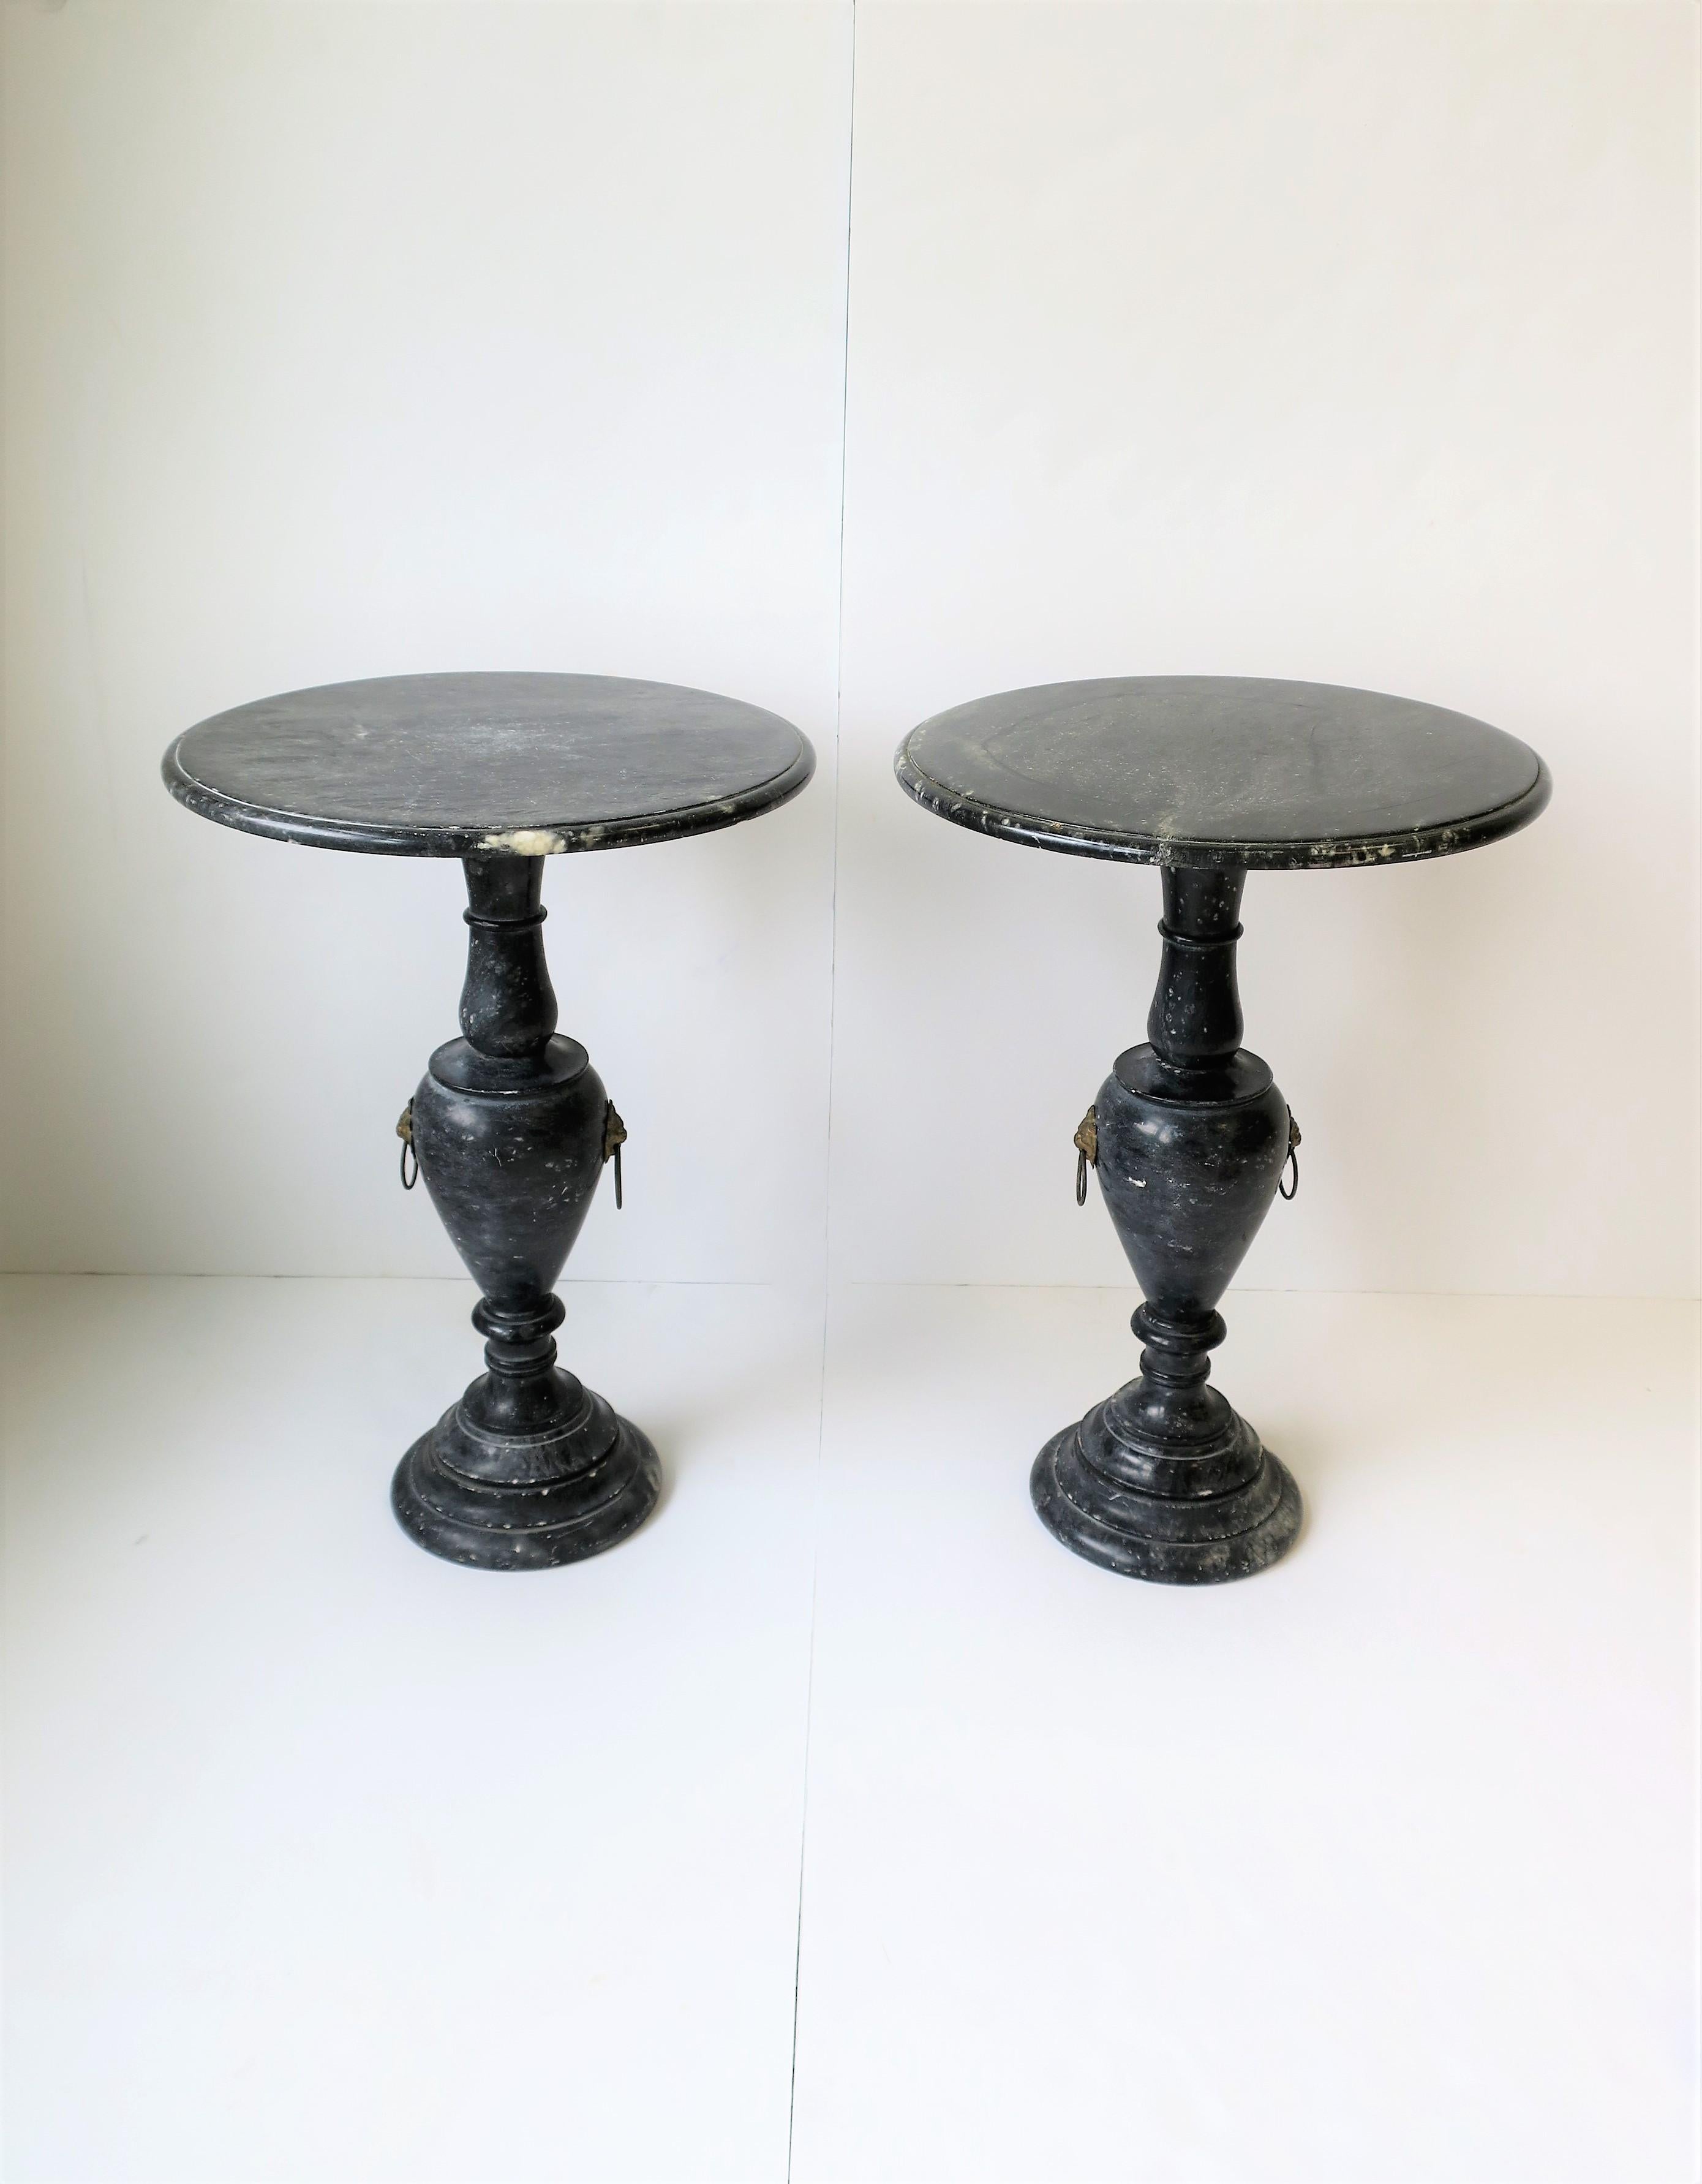 Polished Italian Black and White Marble Round Side Tables